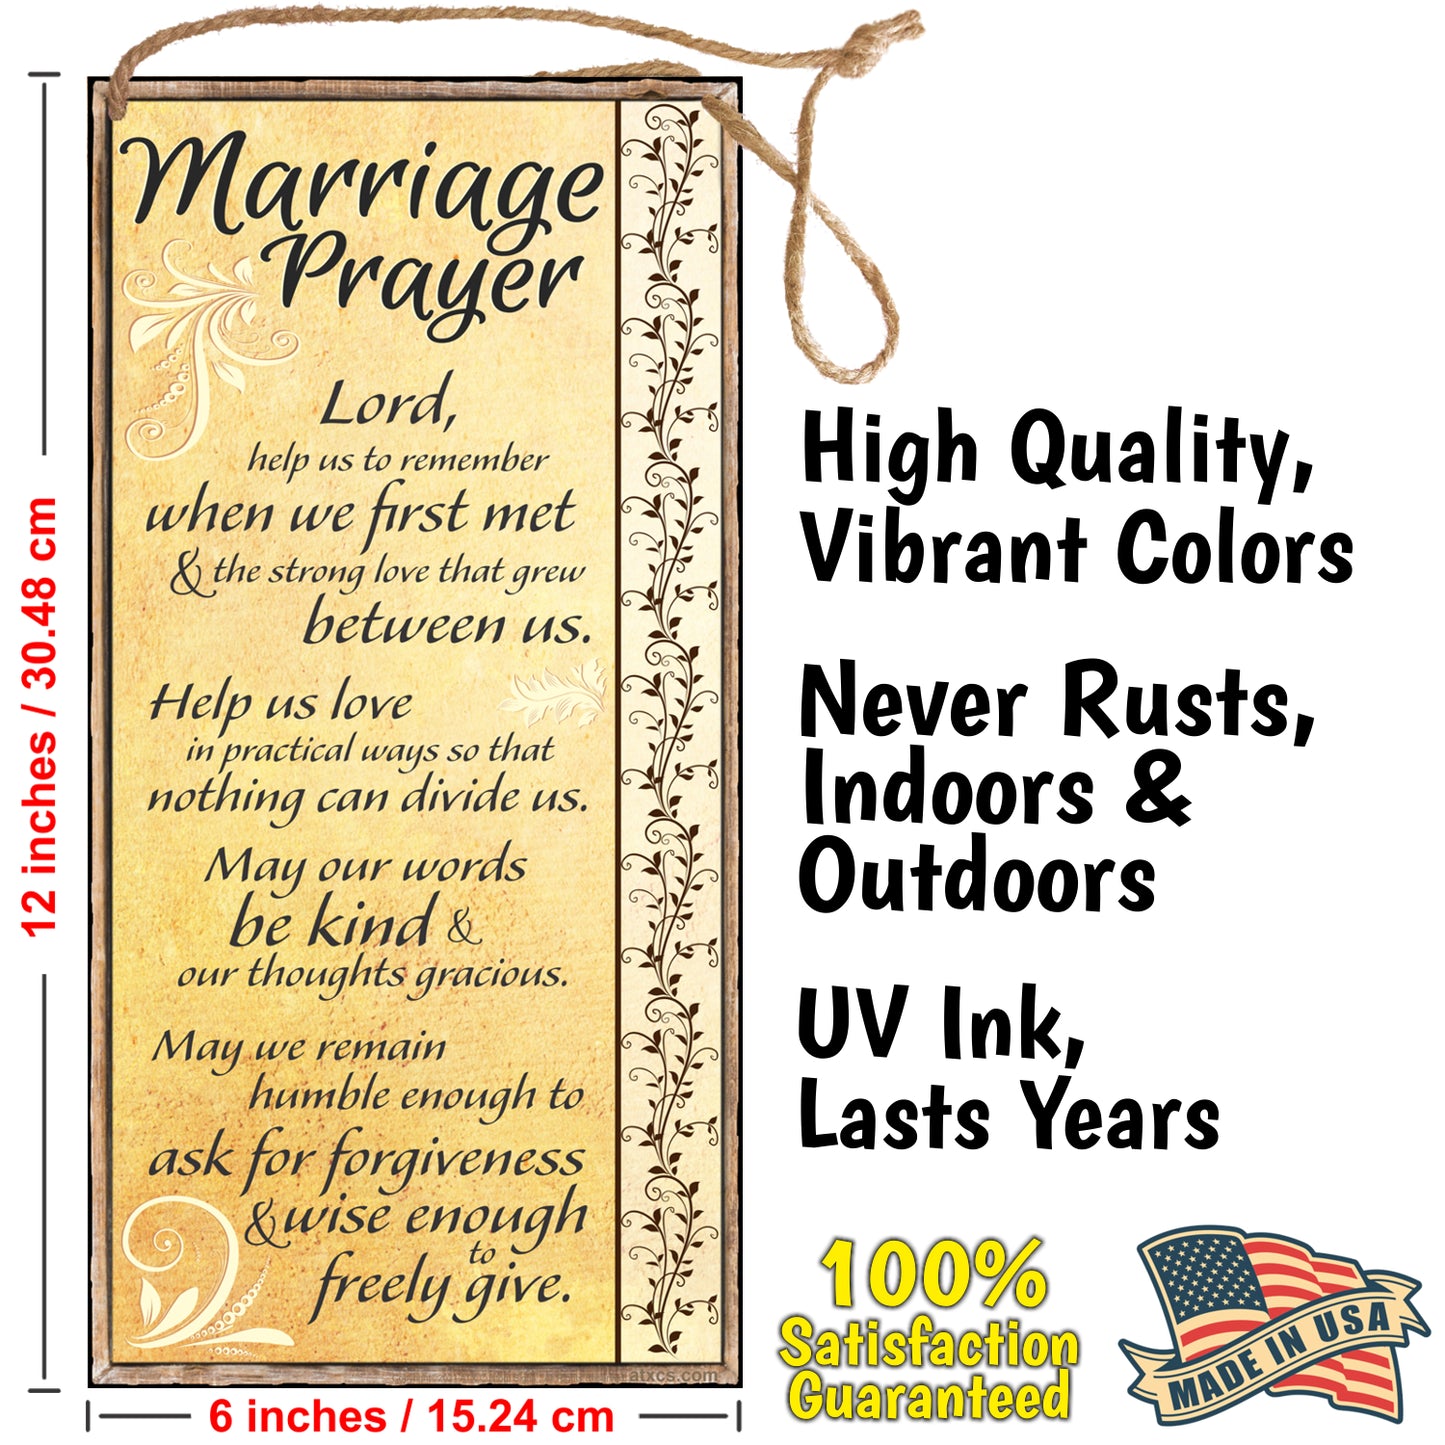 ATX CUSTOM SIGNS - Marriage Prayer Sign - Lord, help us to remember when we first met & the strong love that grew between us.